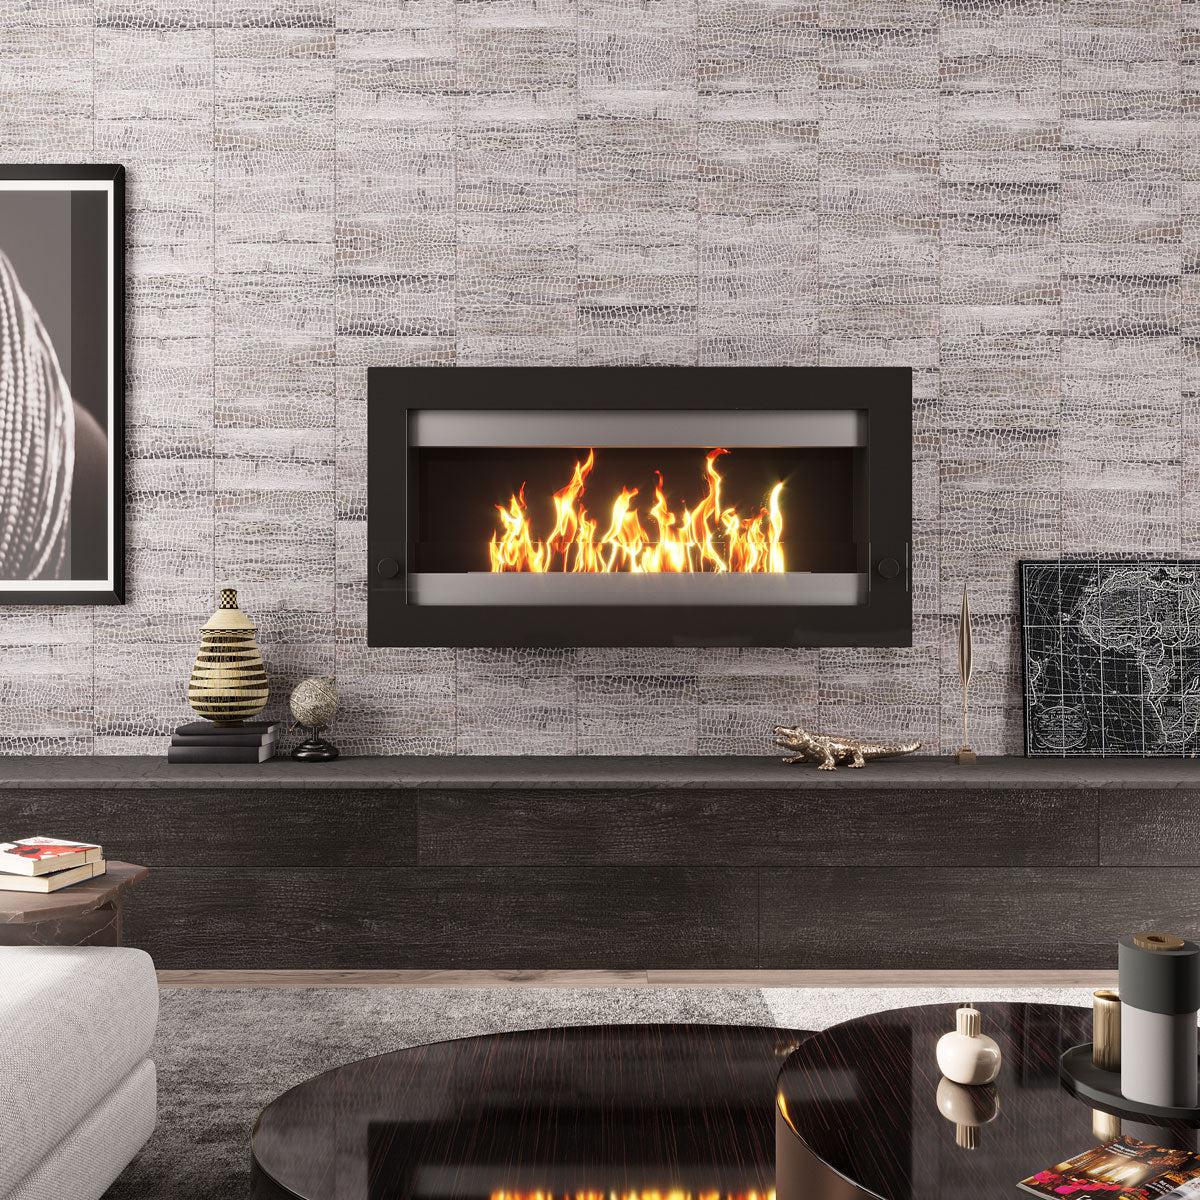 Modern fireplace accent wall with wooden beige etched marble subway tiles with a gator pattern